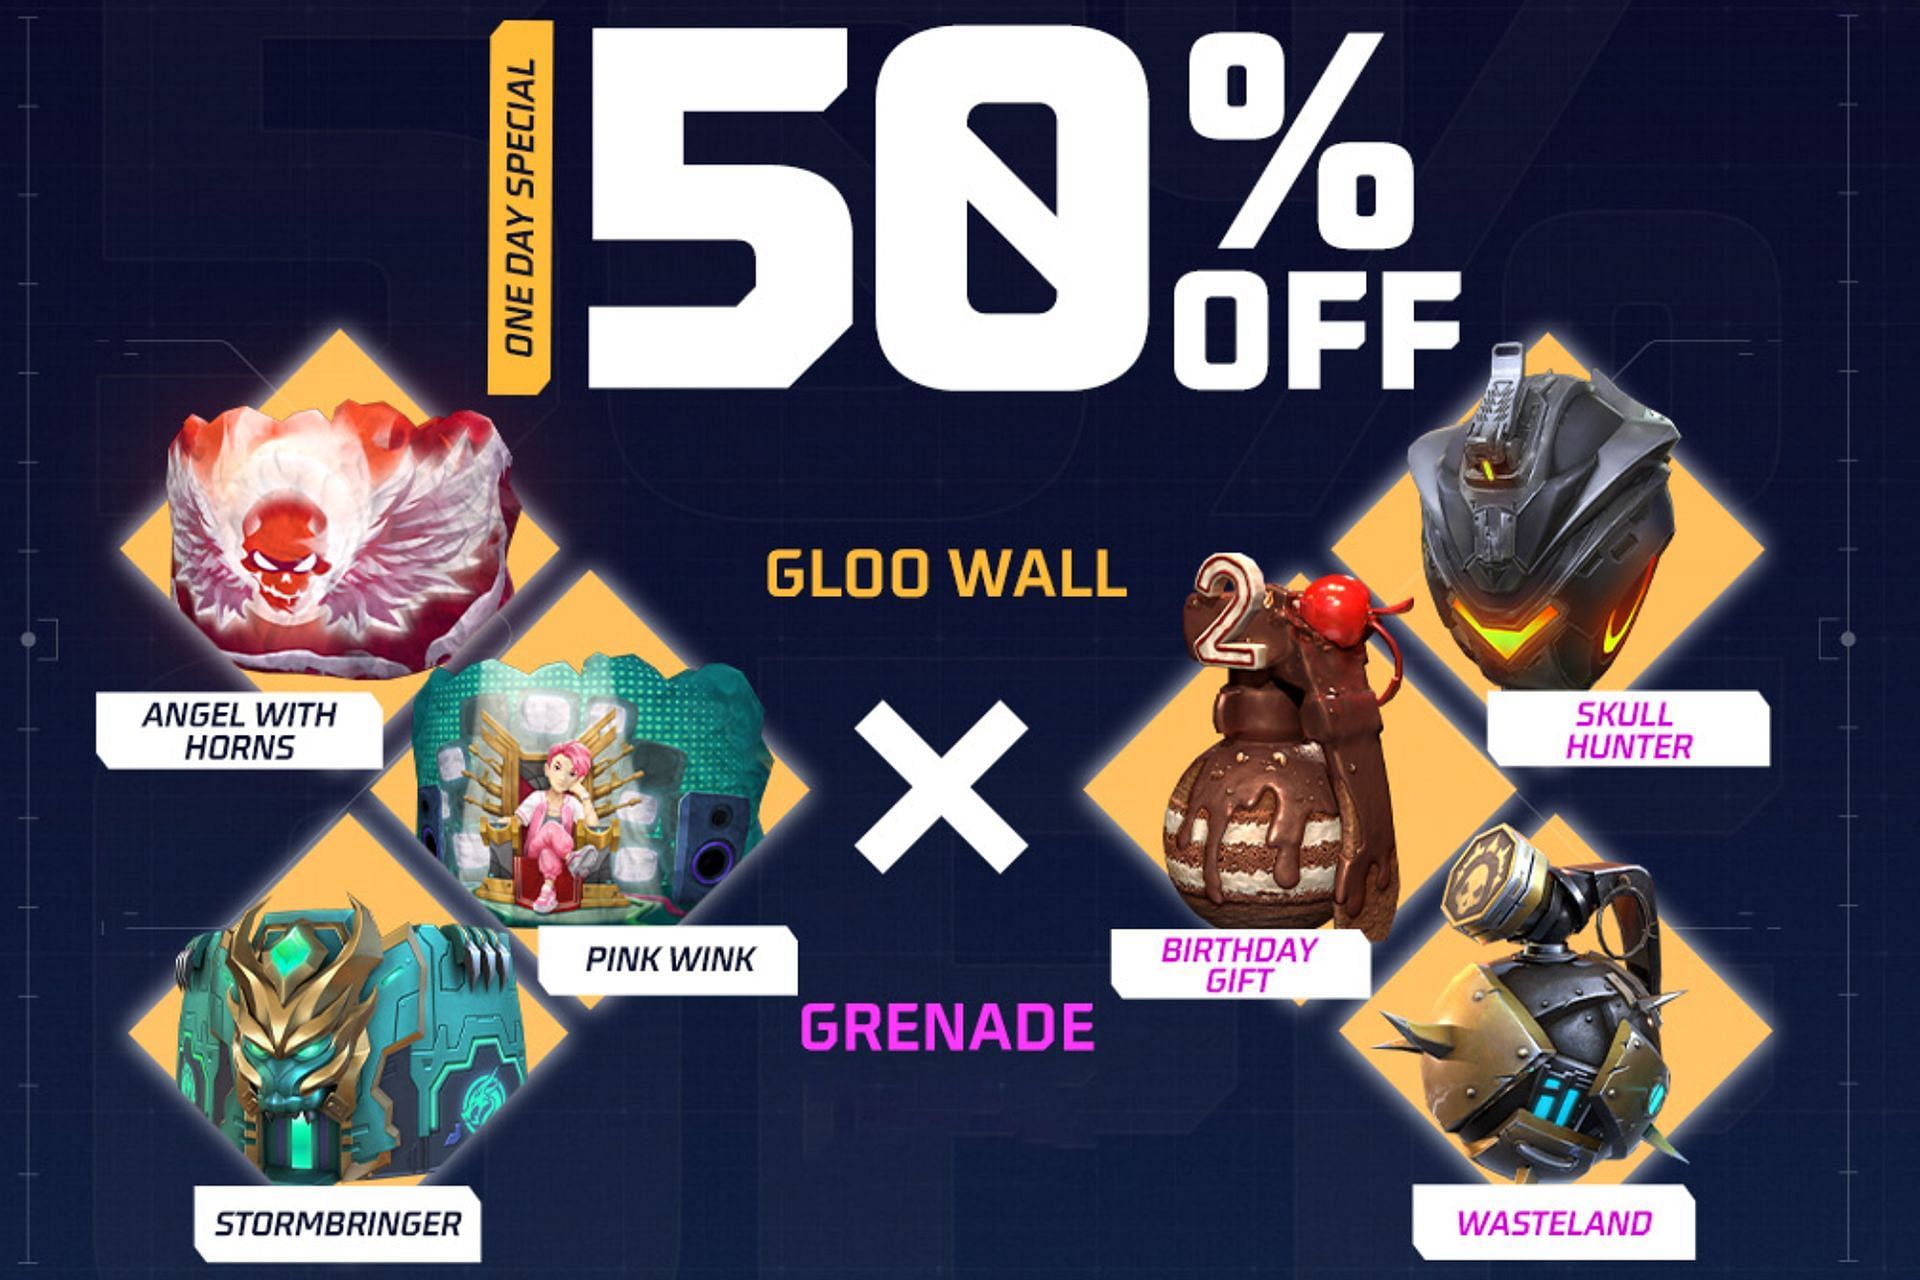 A special discount is available on the Indian server (Image via Garena)